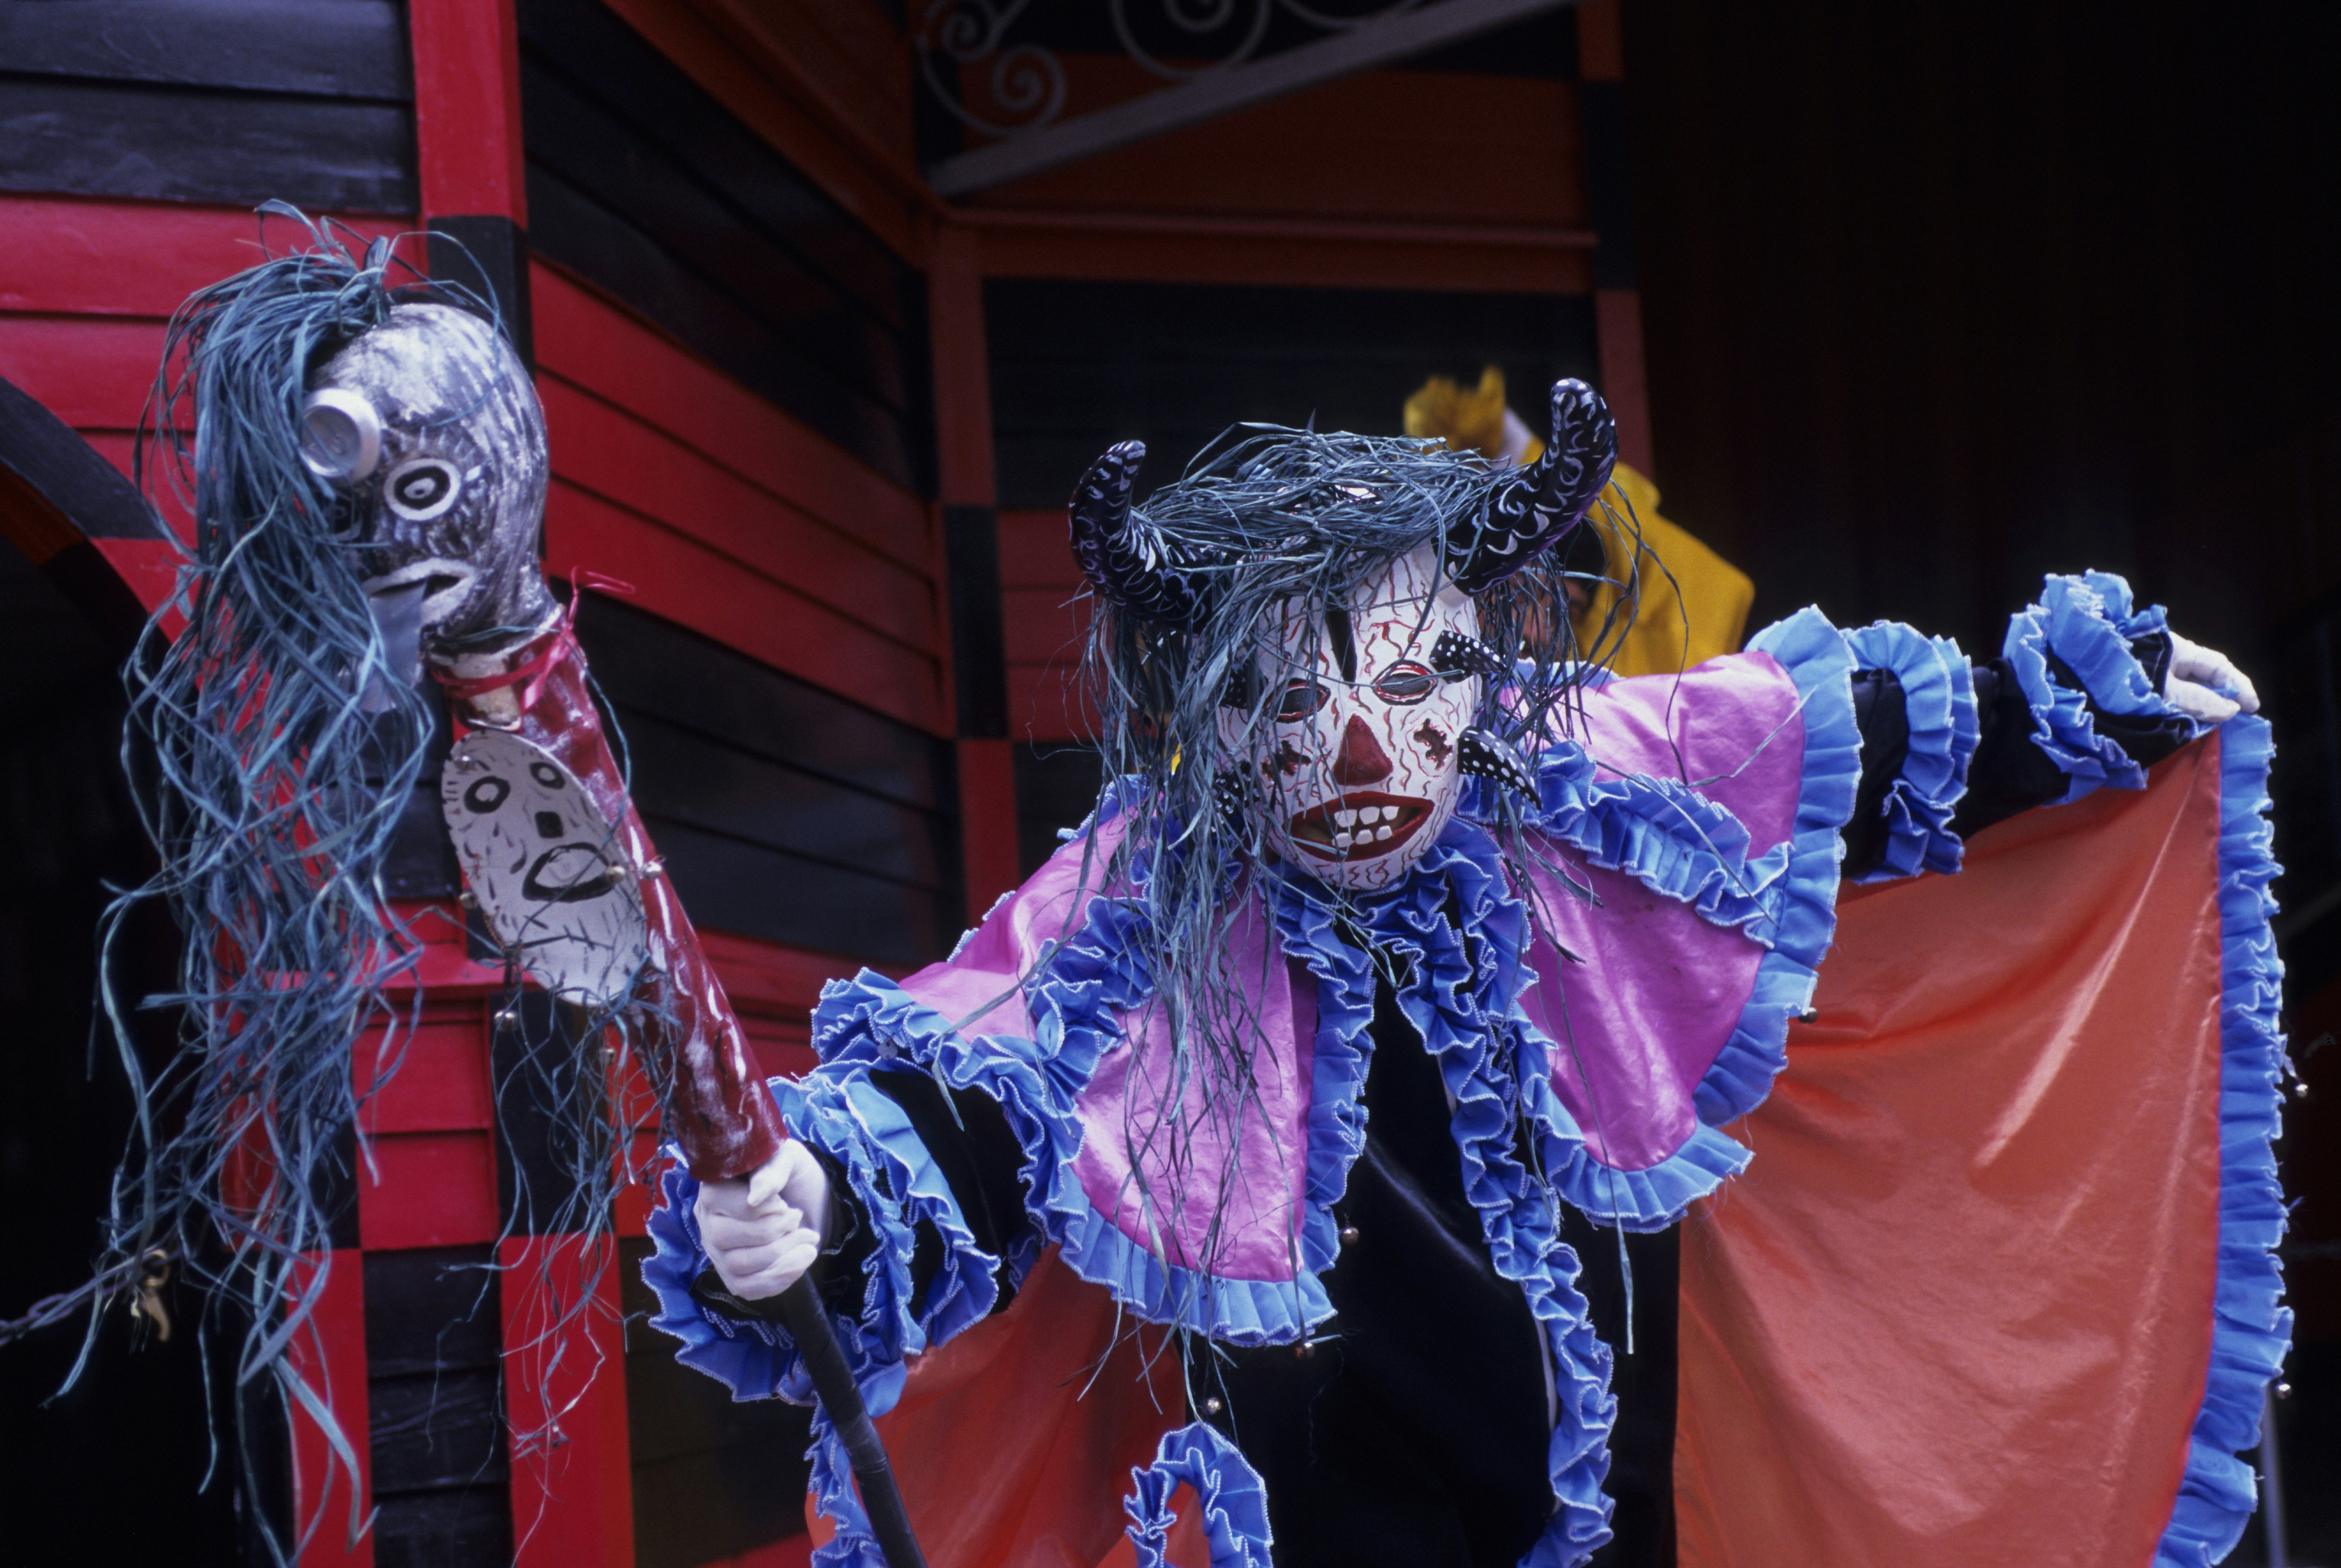 A performer wearing a red and blue cap, wearing a horned face mask and carrying a staff leans menacingly towards the viewer, part of Afro-Puerto Rican festival custom